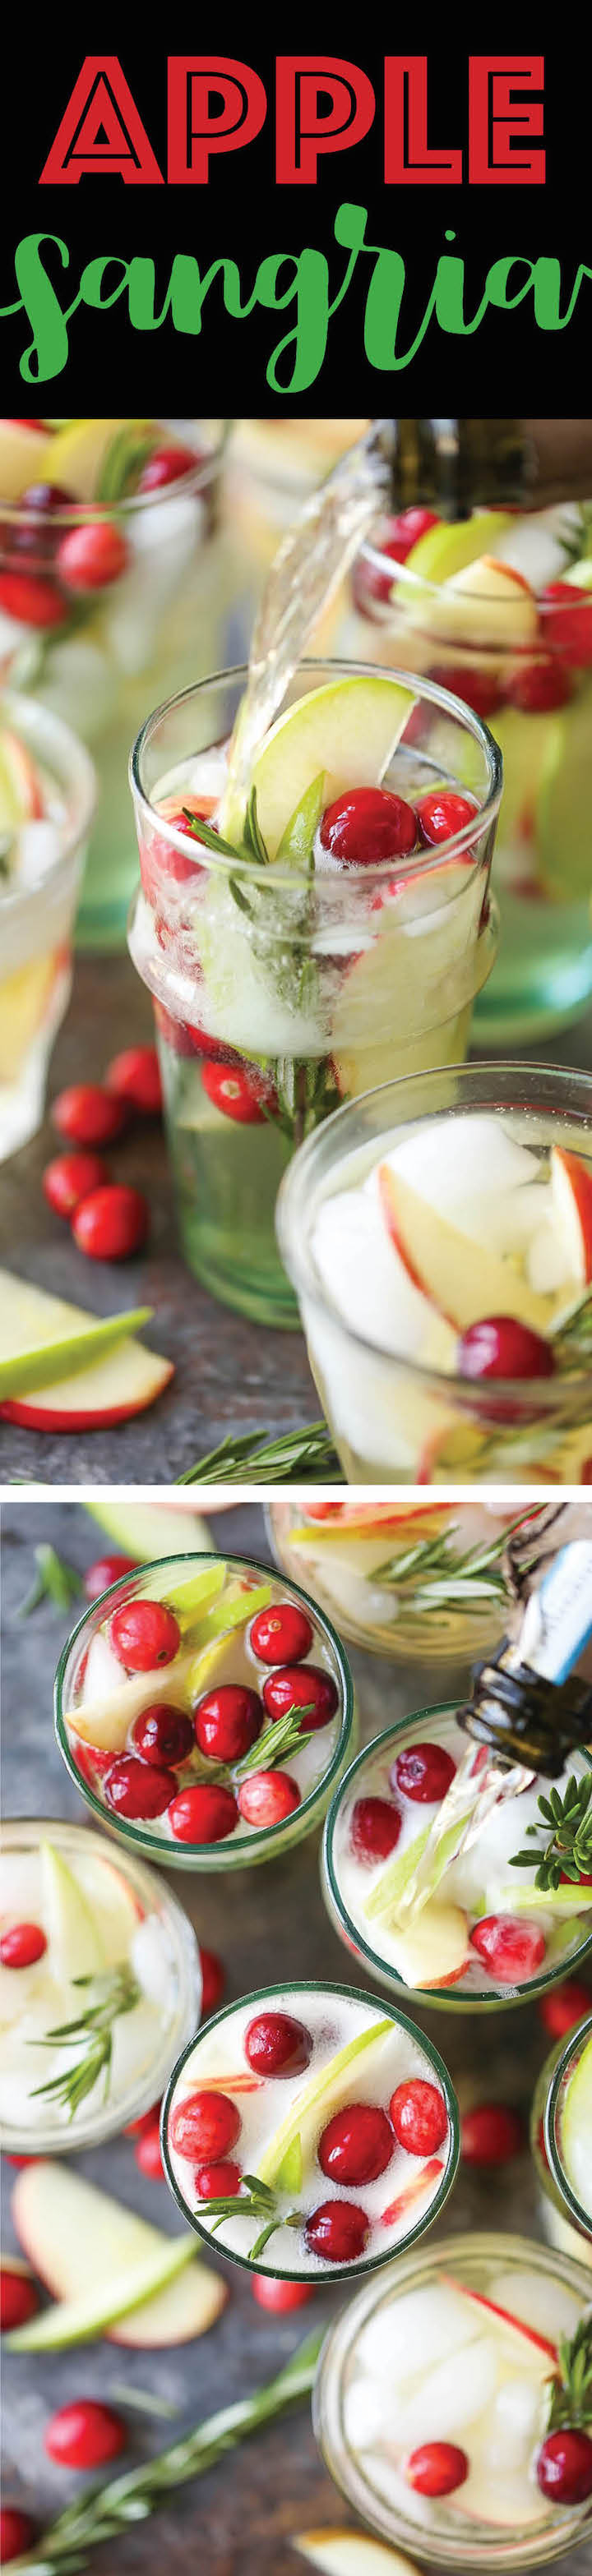 Apple Sangria - The absolute must-have sangria for Fall, Thanksgiving, and Christmas, combining apples, cranberries, wine and apple cider. A winning combo!